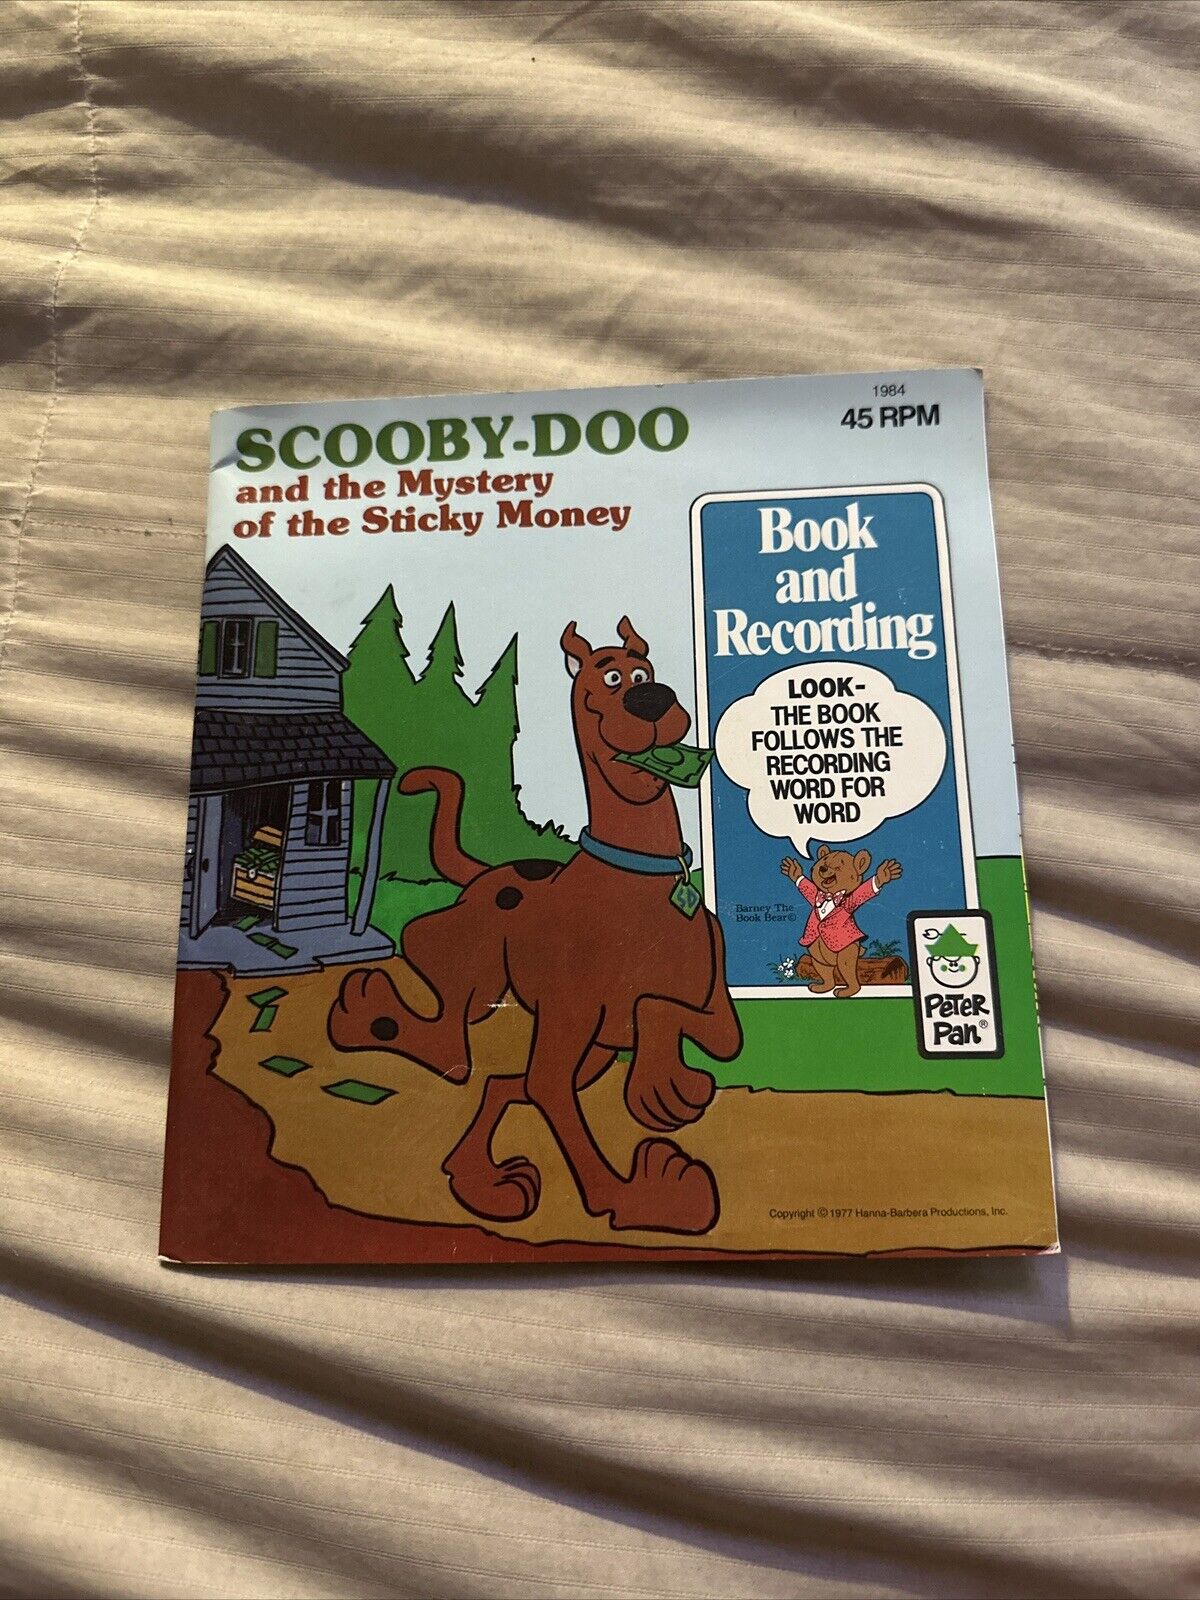 Vintage Scooby-Doo and the Mystery of the Sticky Money 45 rpm Book & Recording 